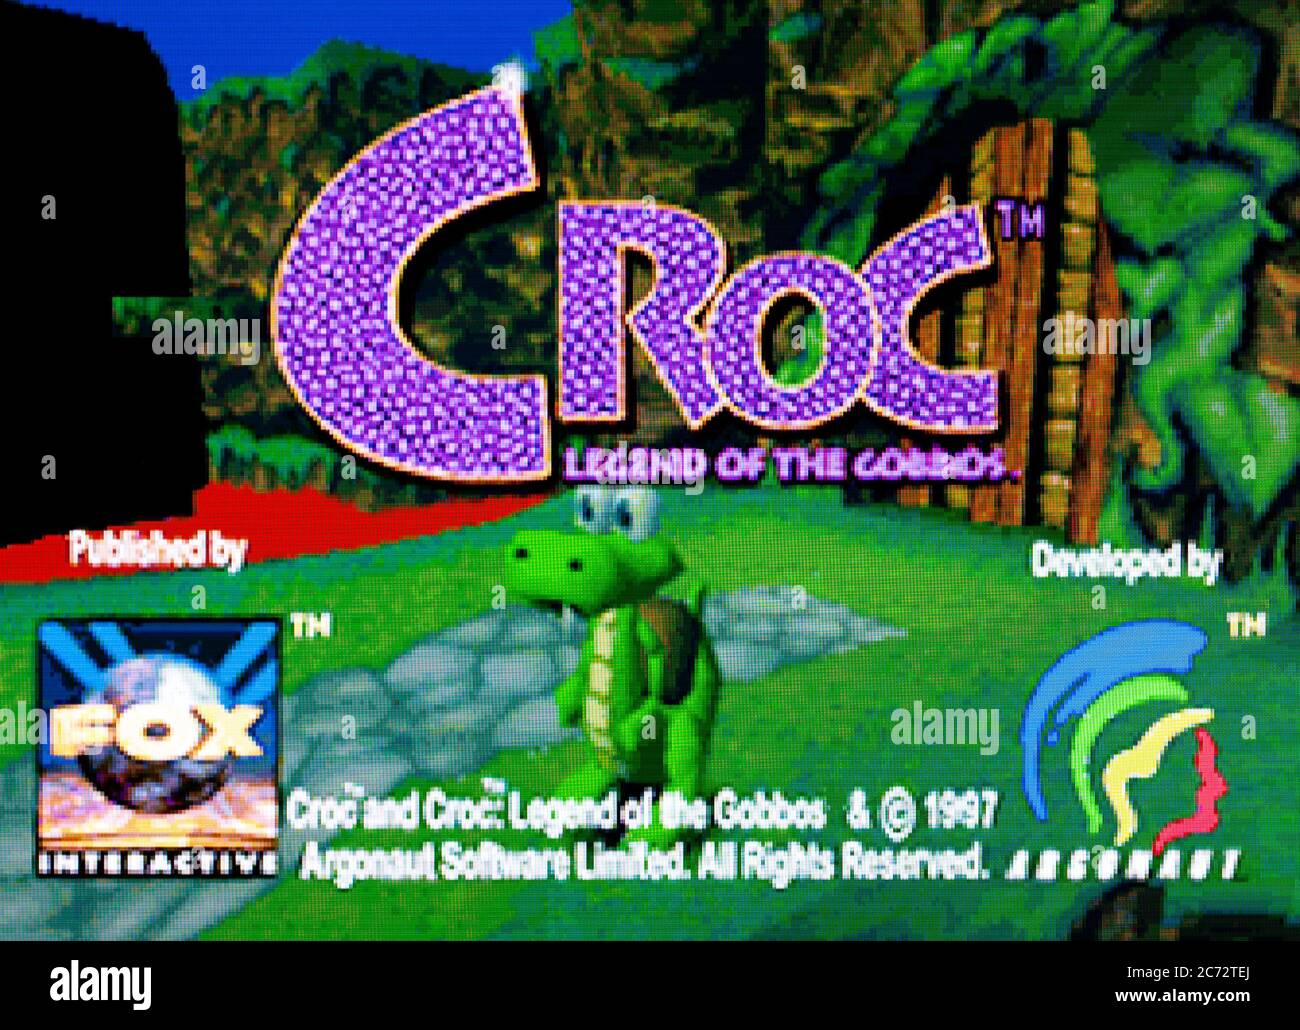 Croc Legend of the Gobbos - Sega Saturn Videogame - Editorial use only Stock Photo